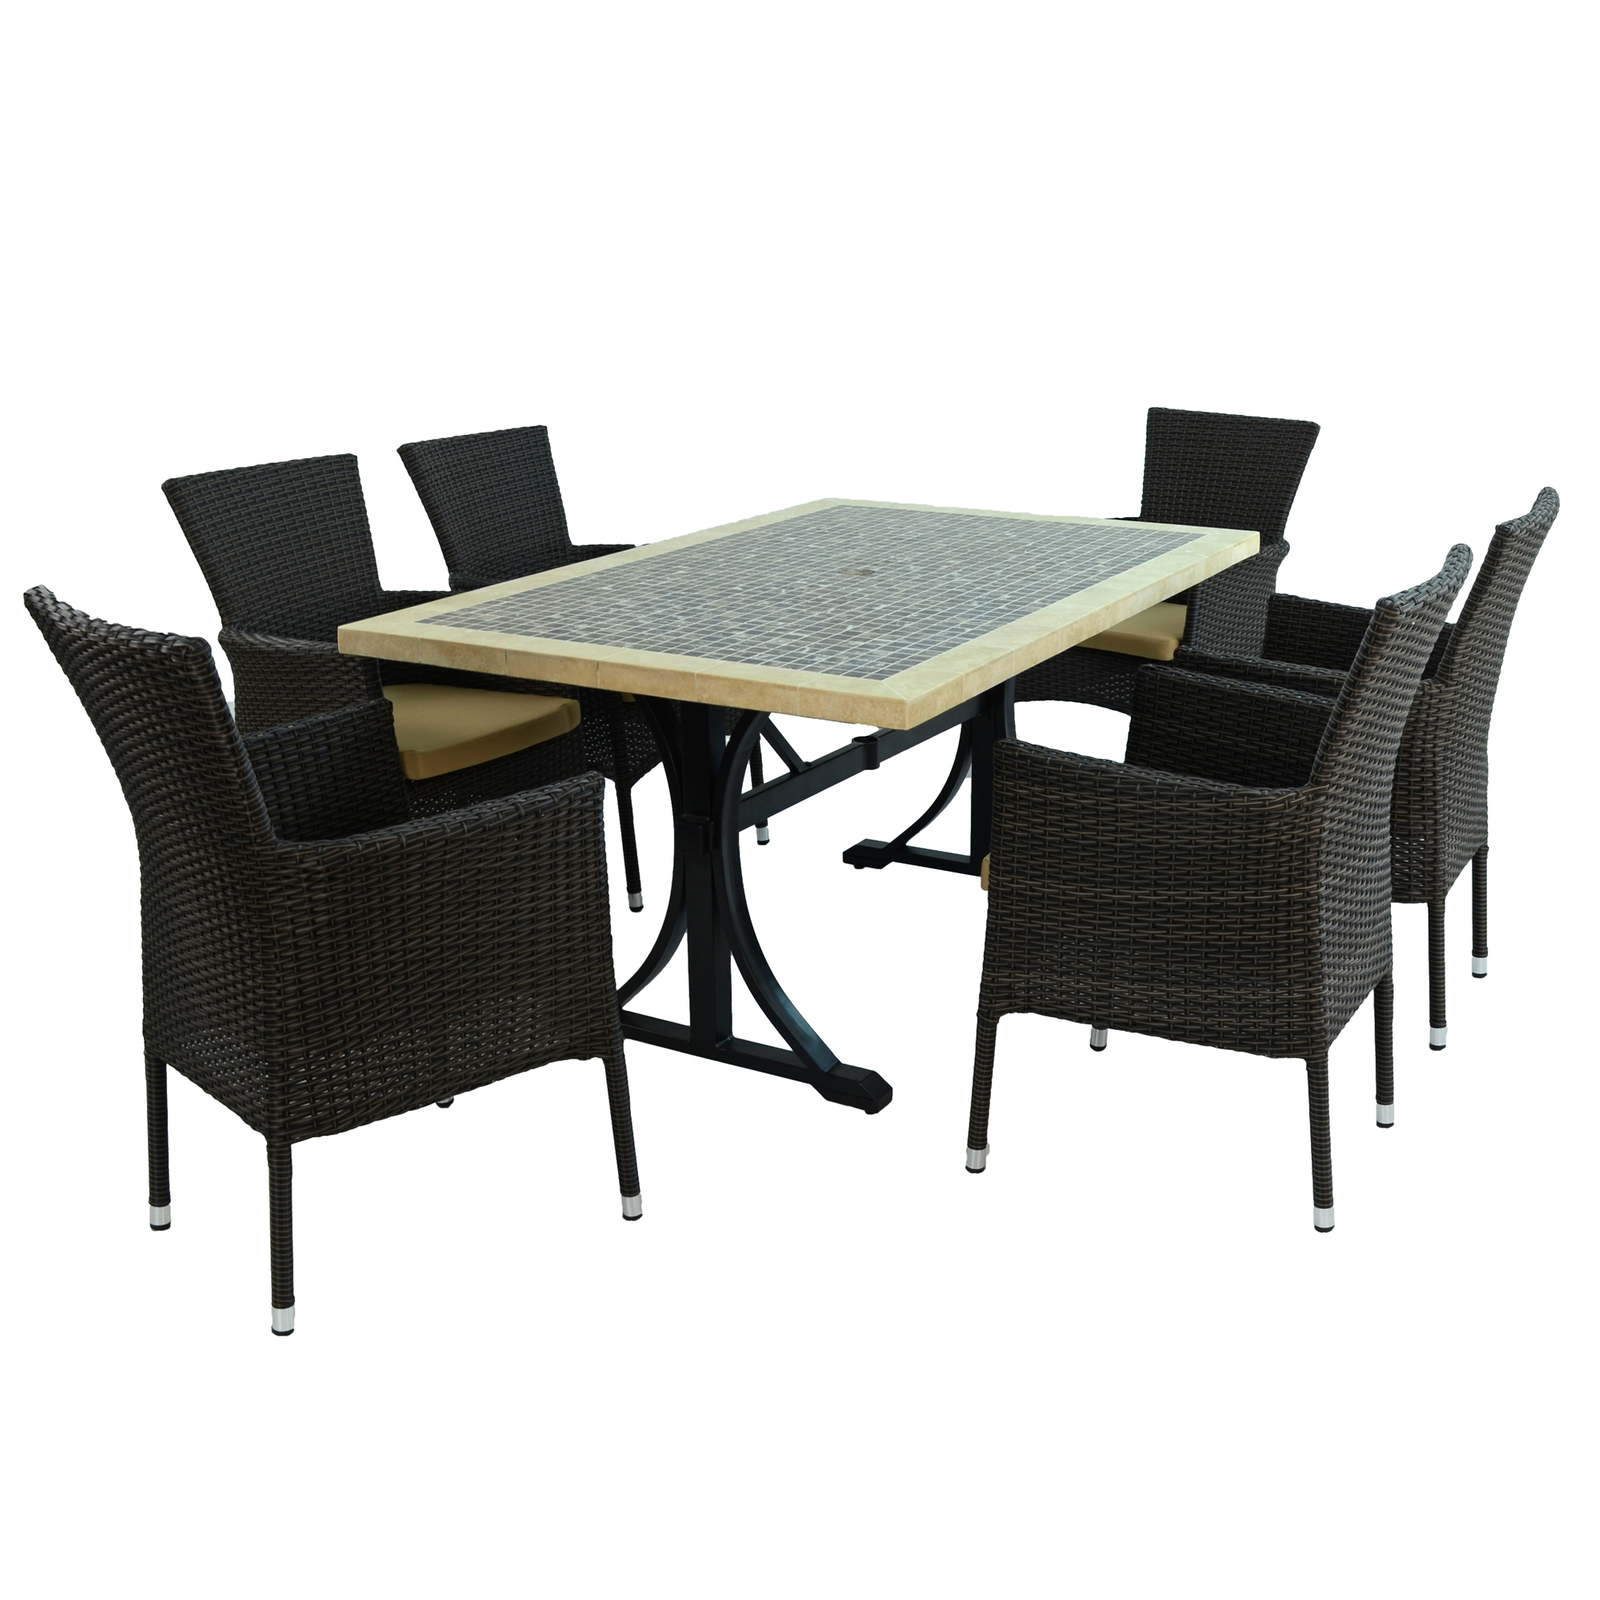 Byron Manor Wilmington Mosaic Stone Garden Dining Table With 6 Stockholm Brown Wicker Chairs Dining Sets Byron Manor Default Title  